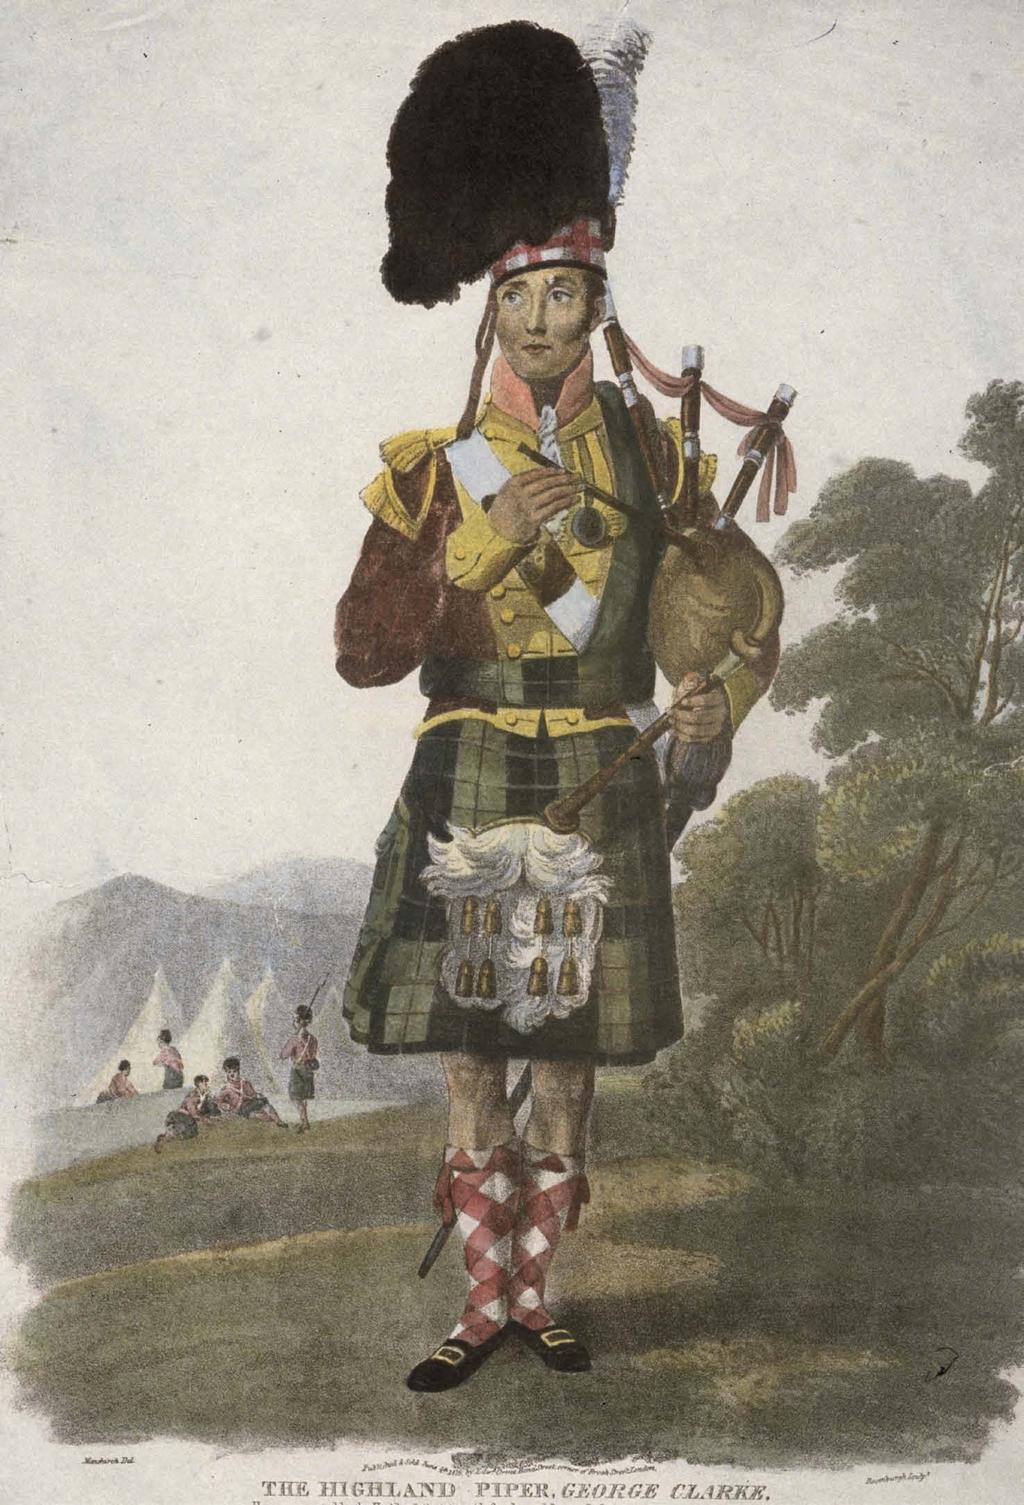 Circa 1808: George Clarke, a piper of the 71st, carrying the delineated silver pipes he was awarded by the Highland Society for his brave conduct at the Battle of Veimeria on 21st August, 1808.